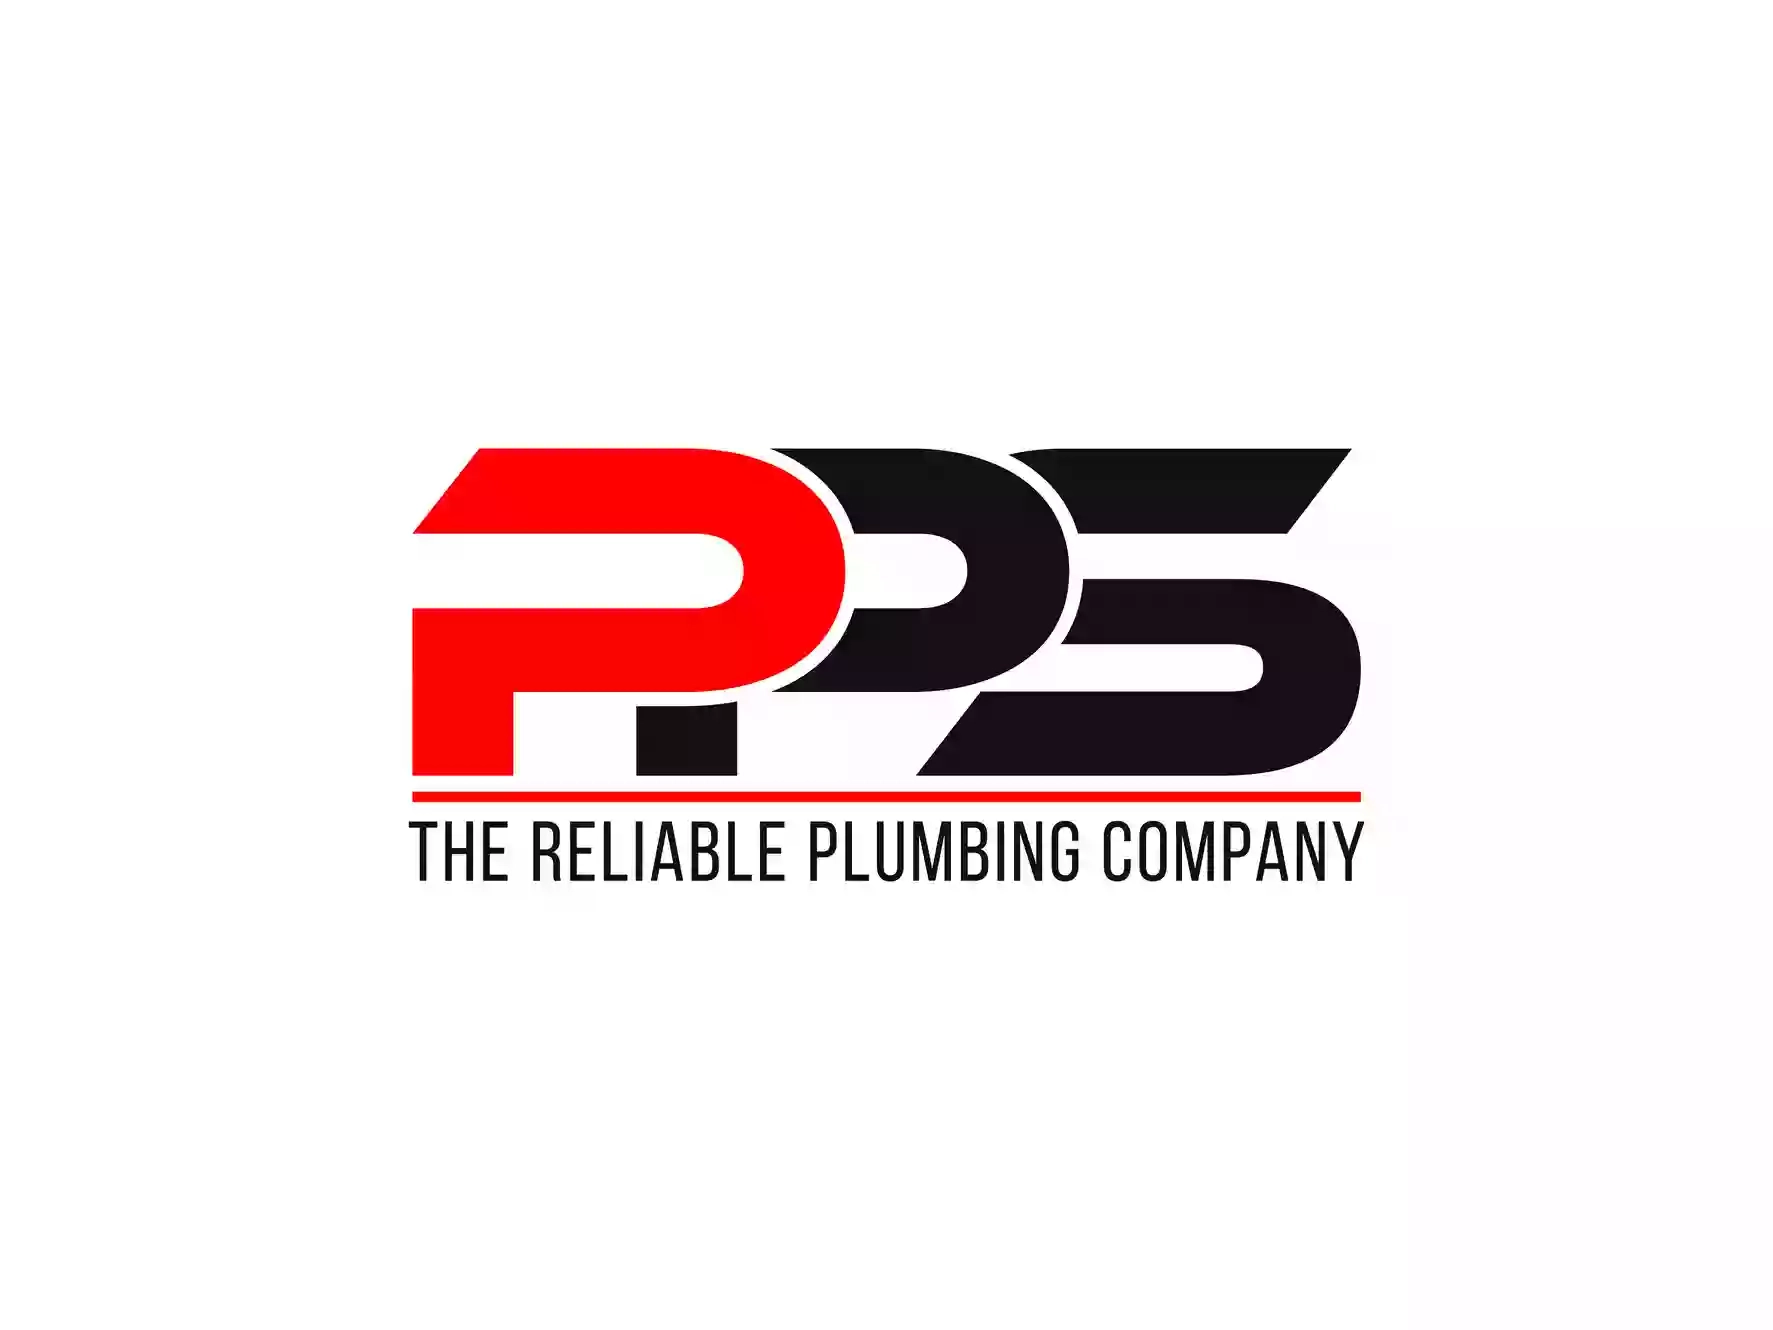 PPS - The Reliable Plumbing Company